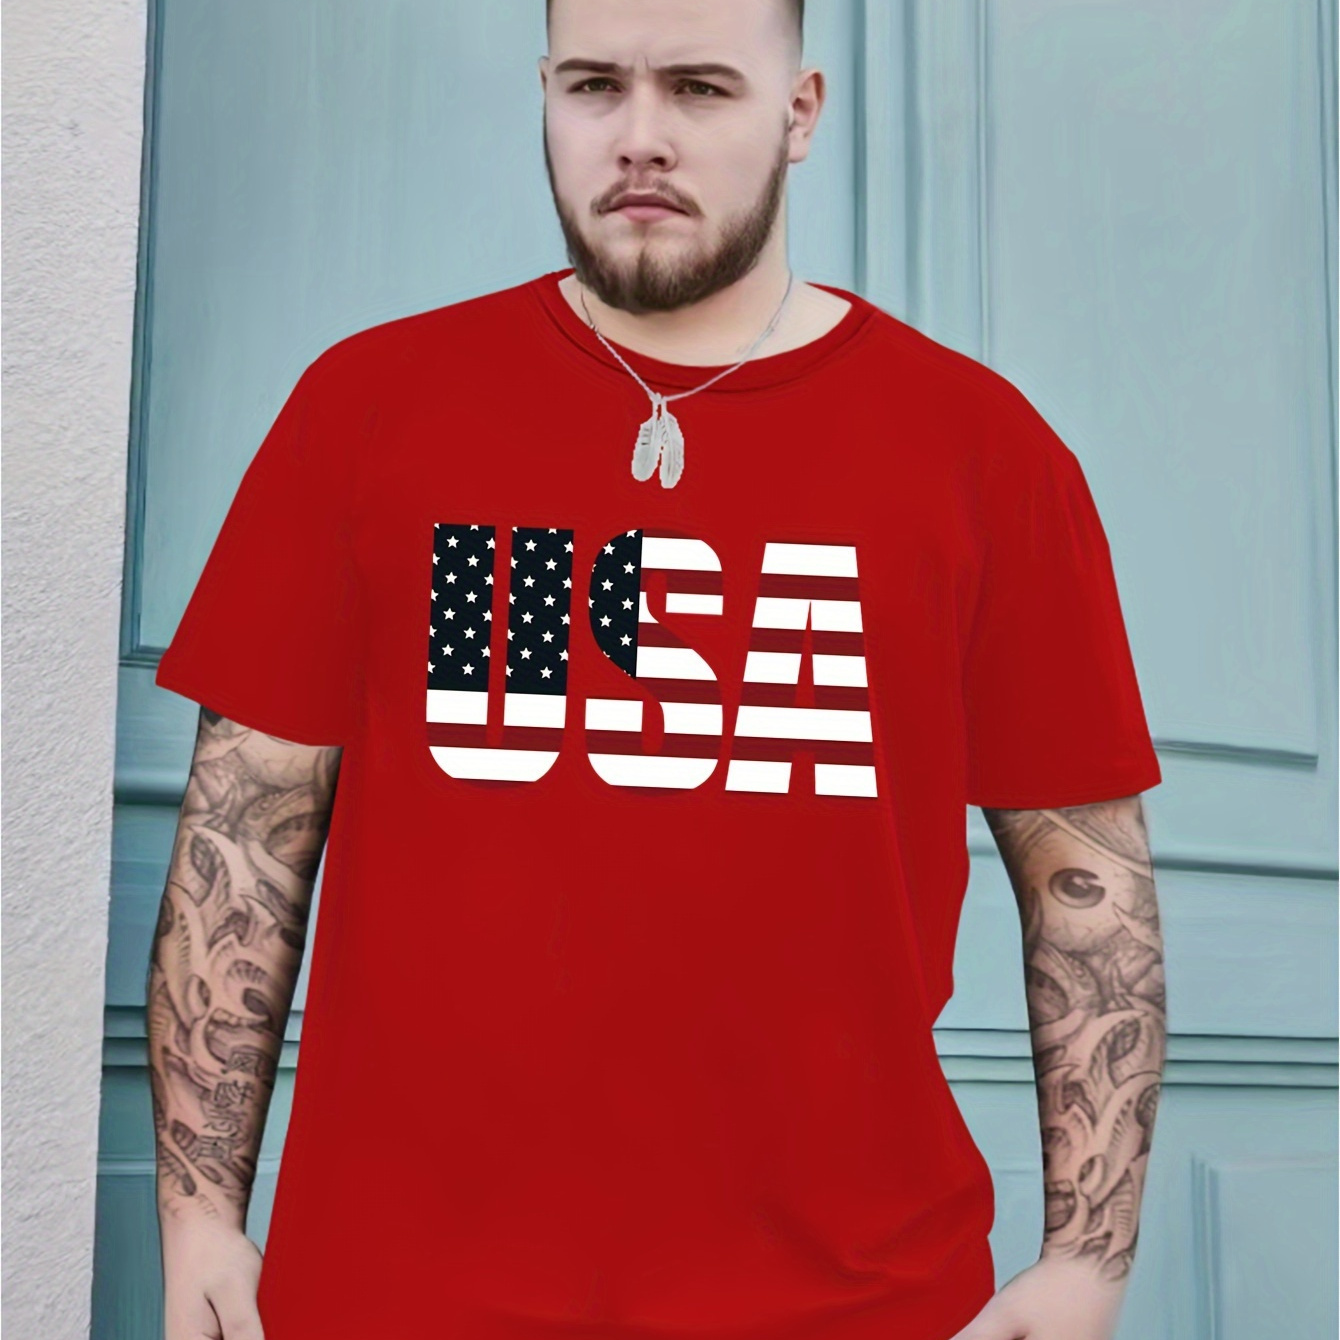 

Plus Size Men's Casual T-shirts, Usa Print Graphic Round Neck Comfy Tees Top Spring Summer Clothes, Men's Clothing